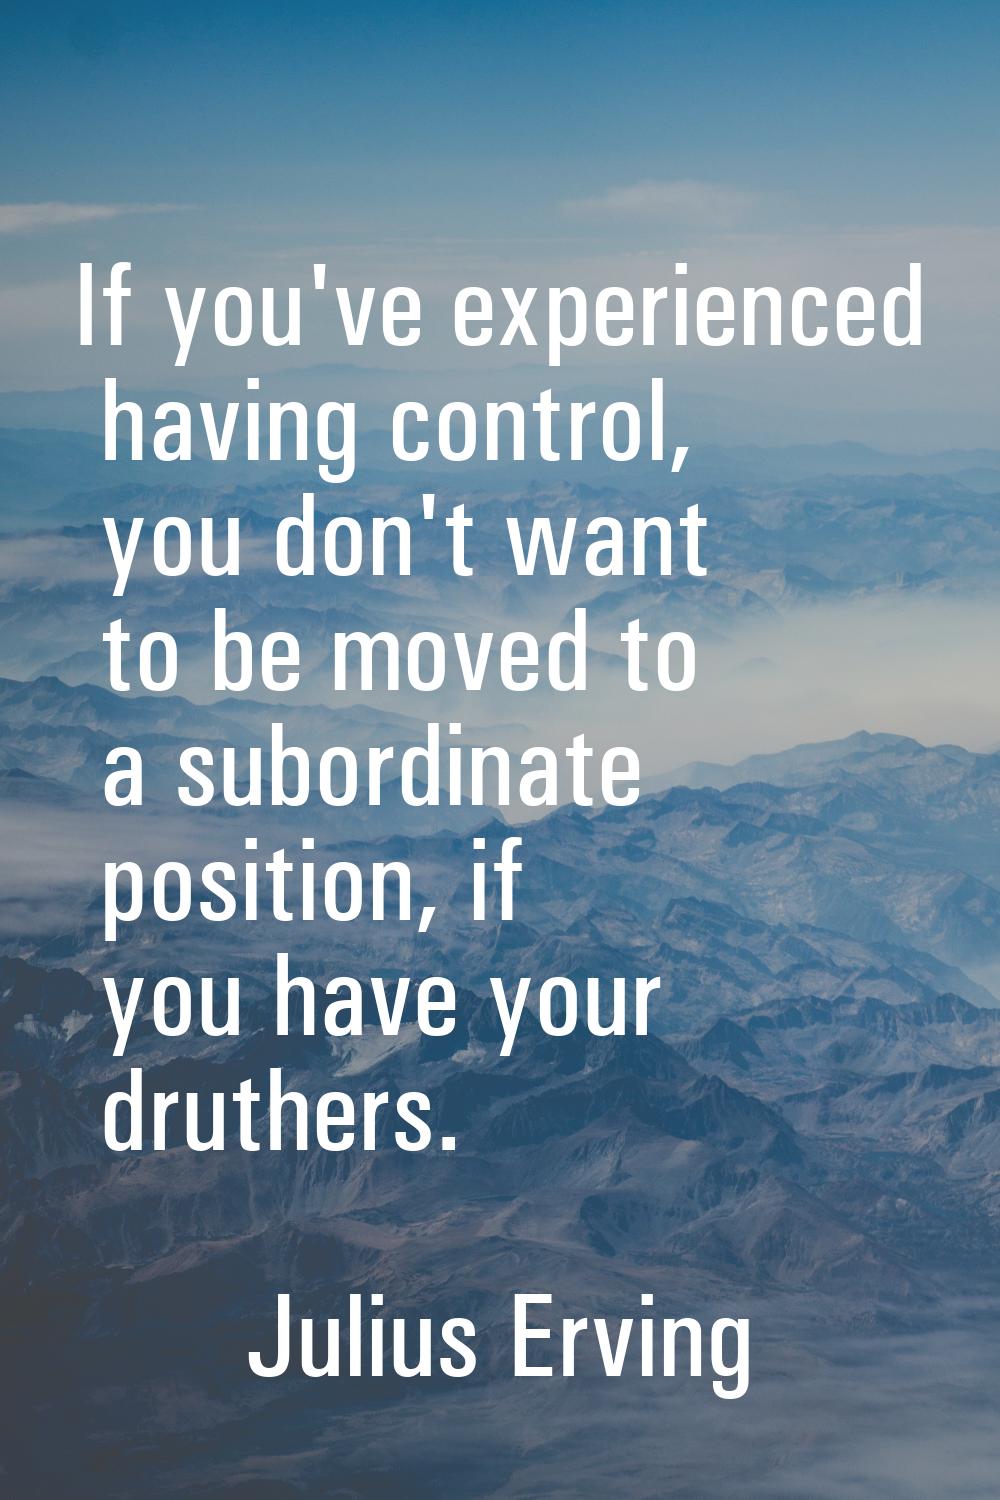 If you've experienced having control, you don't want to be moved to a subordinate position, if you 